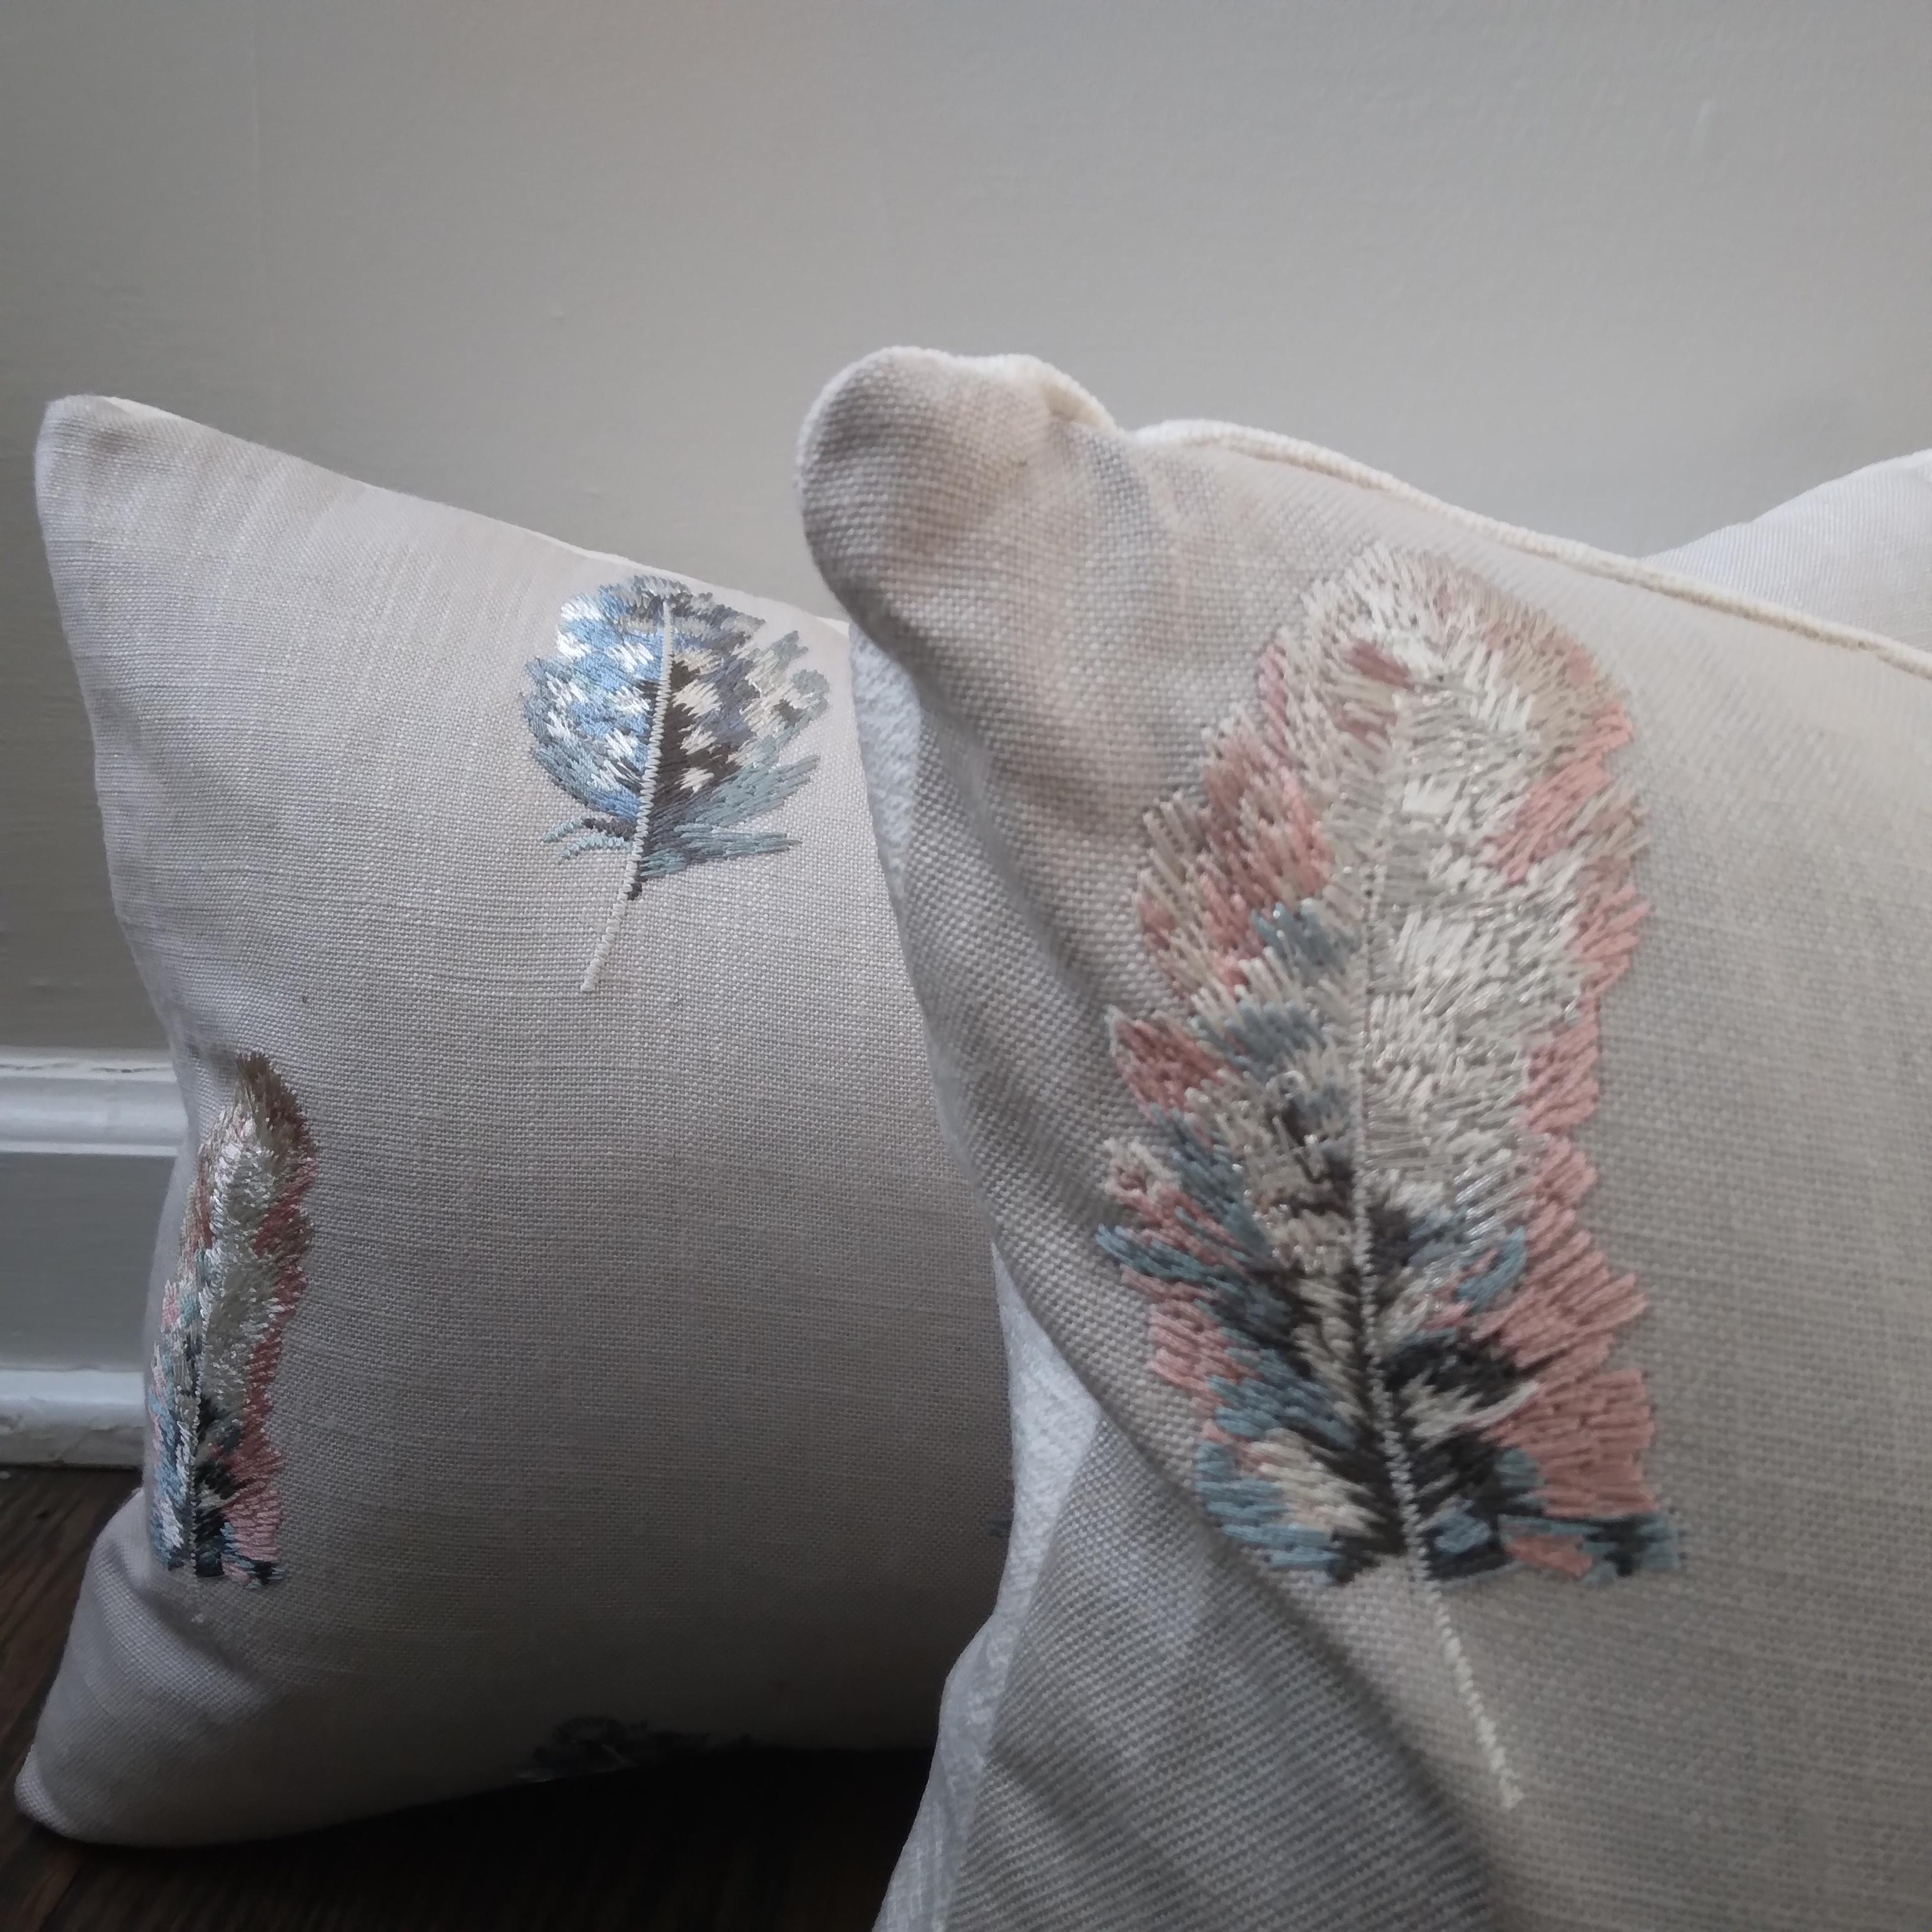 Delicate plumes of light -- Animalia-inspired pillows are the perfect way to add soothing color and playful design to your living space. The pastel pink and blue, light-catching embroidery looks fantastic against a lineny background. We love the